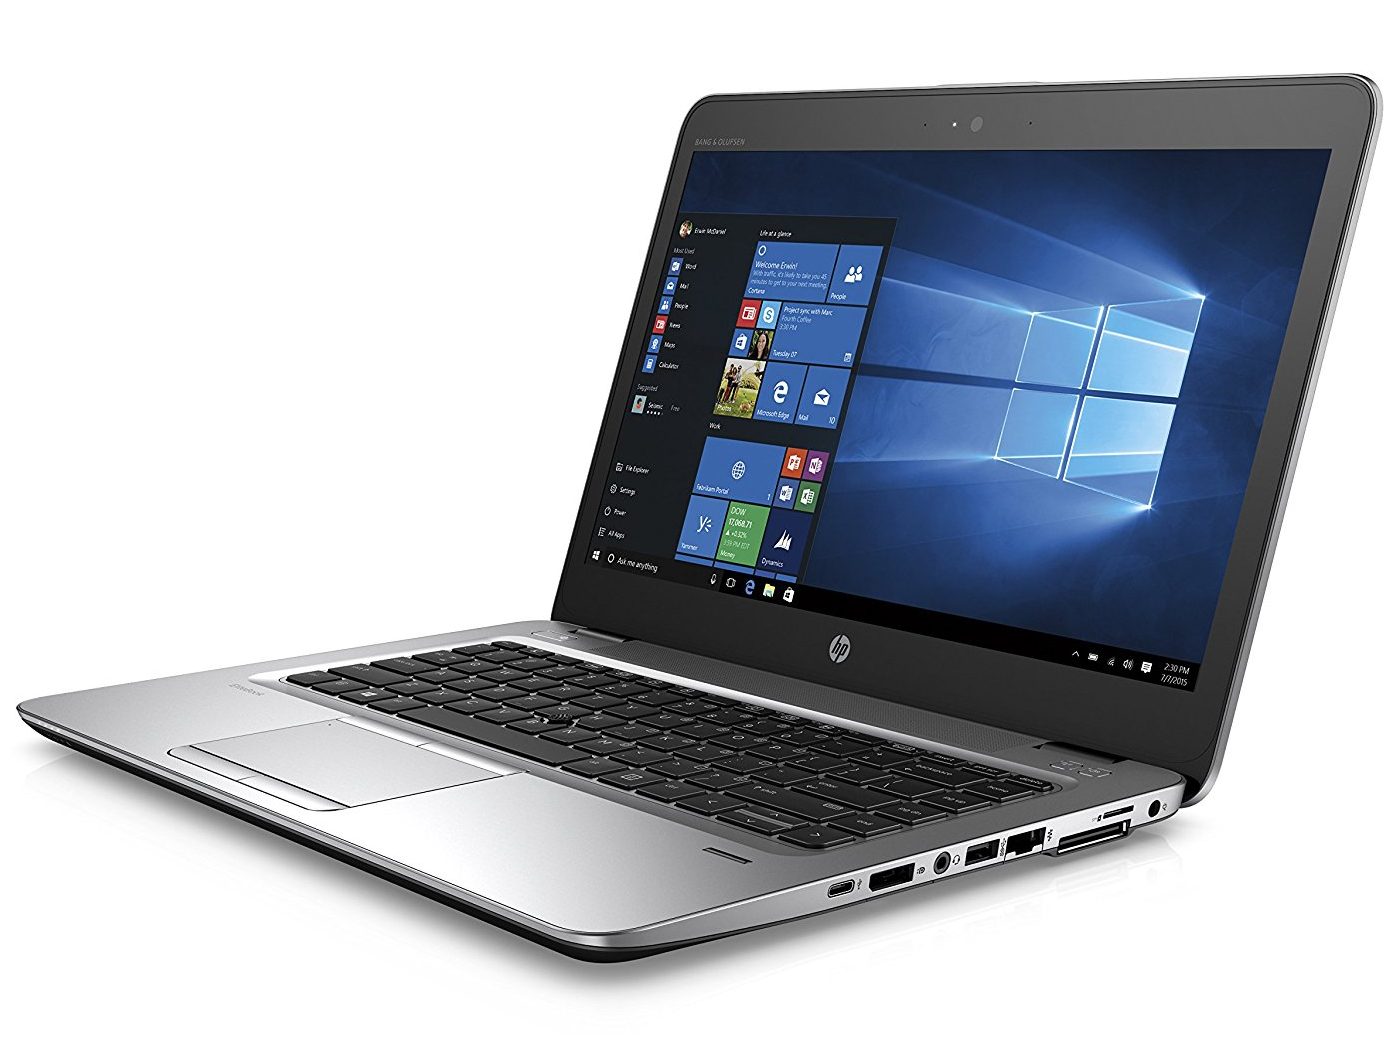 HP mt43 (A8-9600B, SSD, FHD) Thin Client Review - NotebookCheck